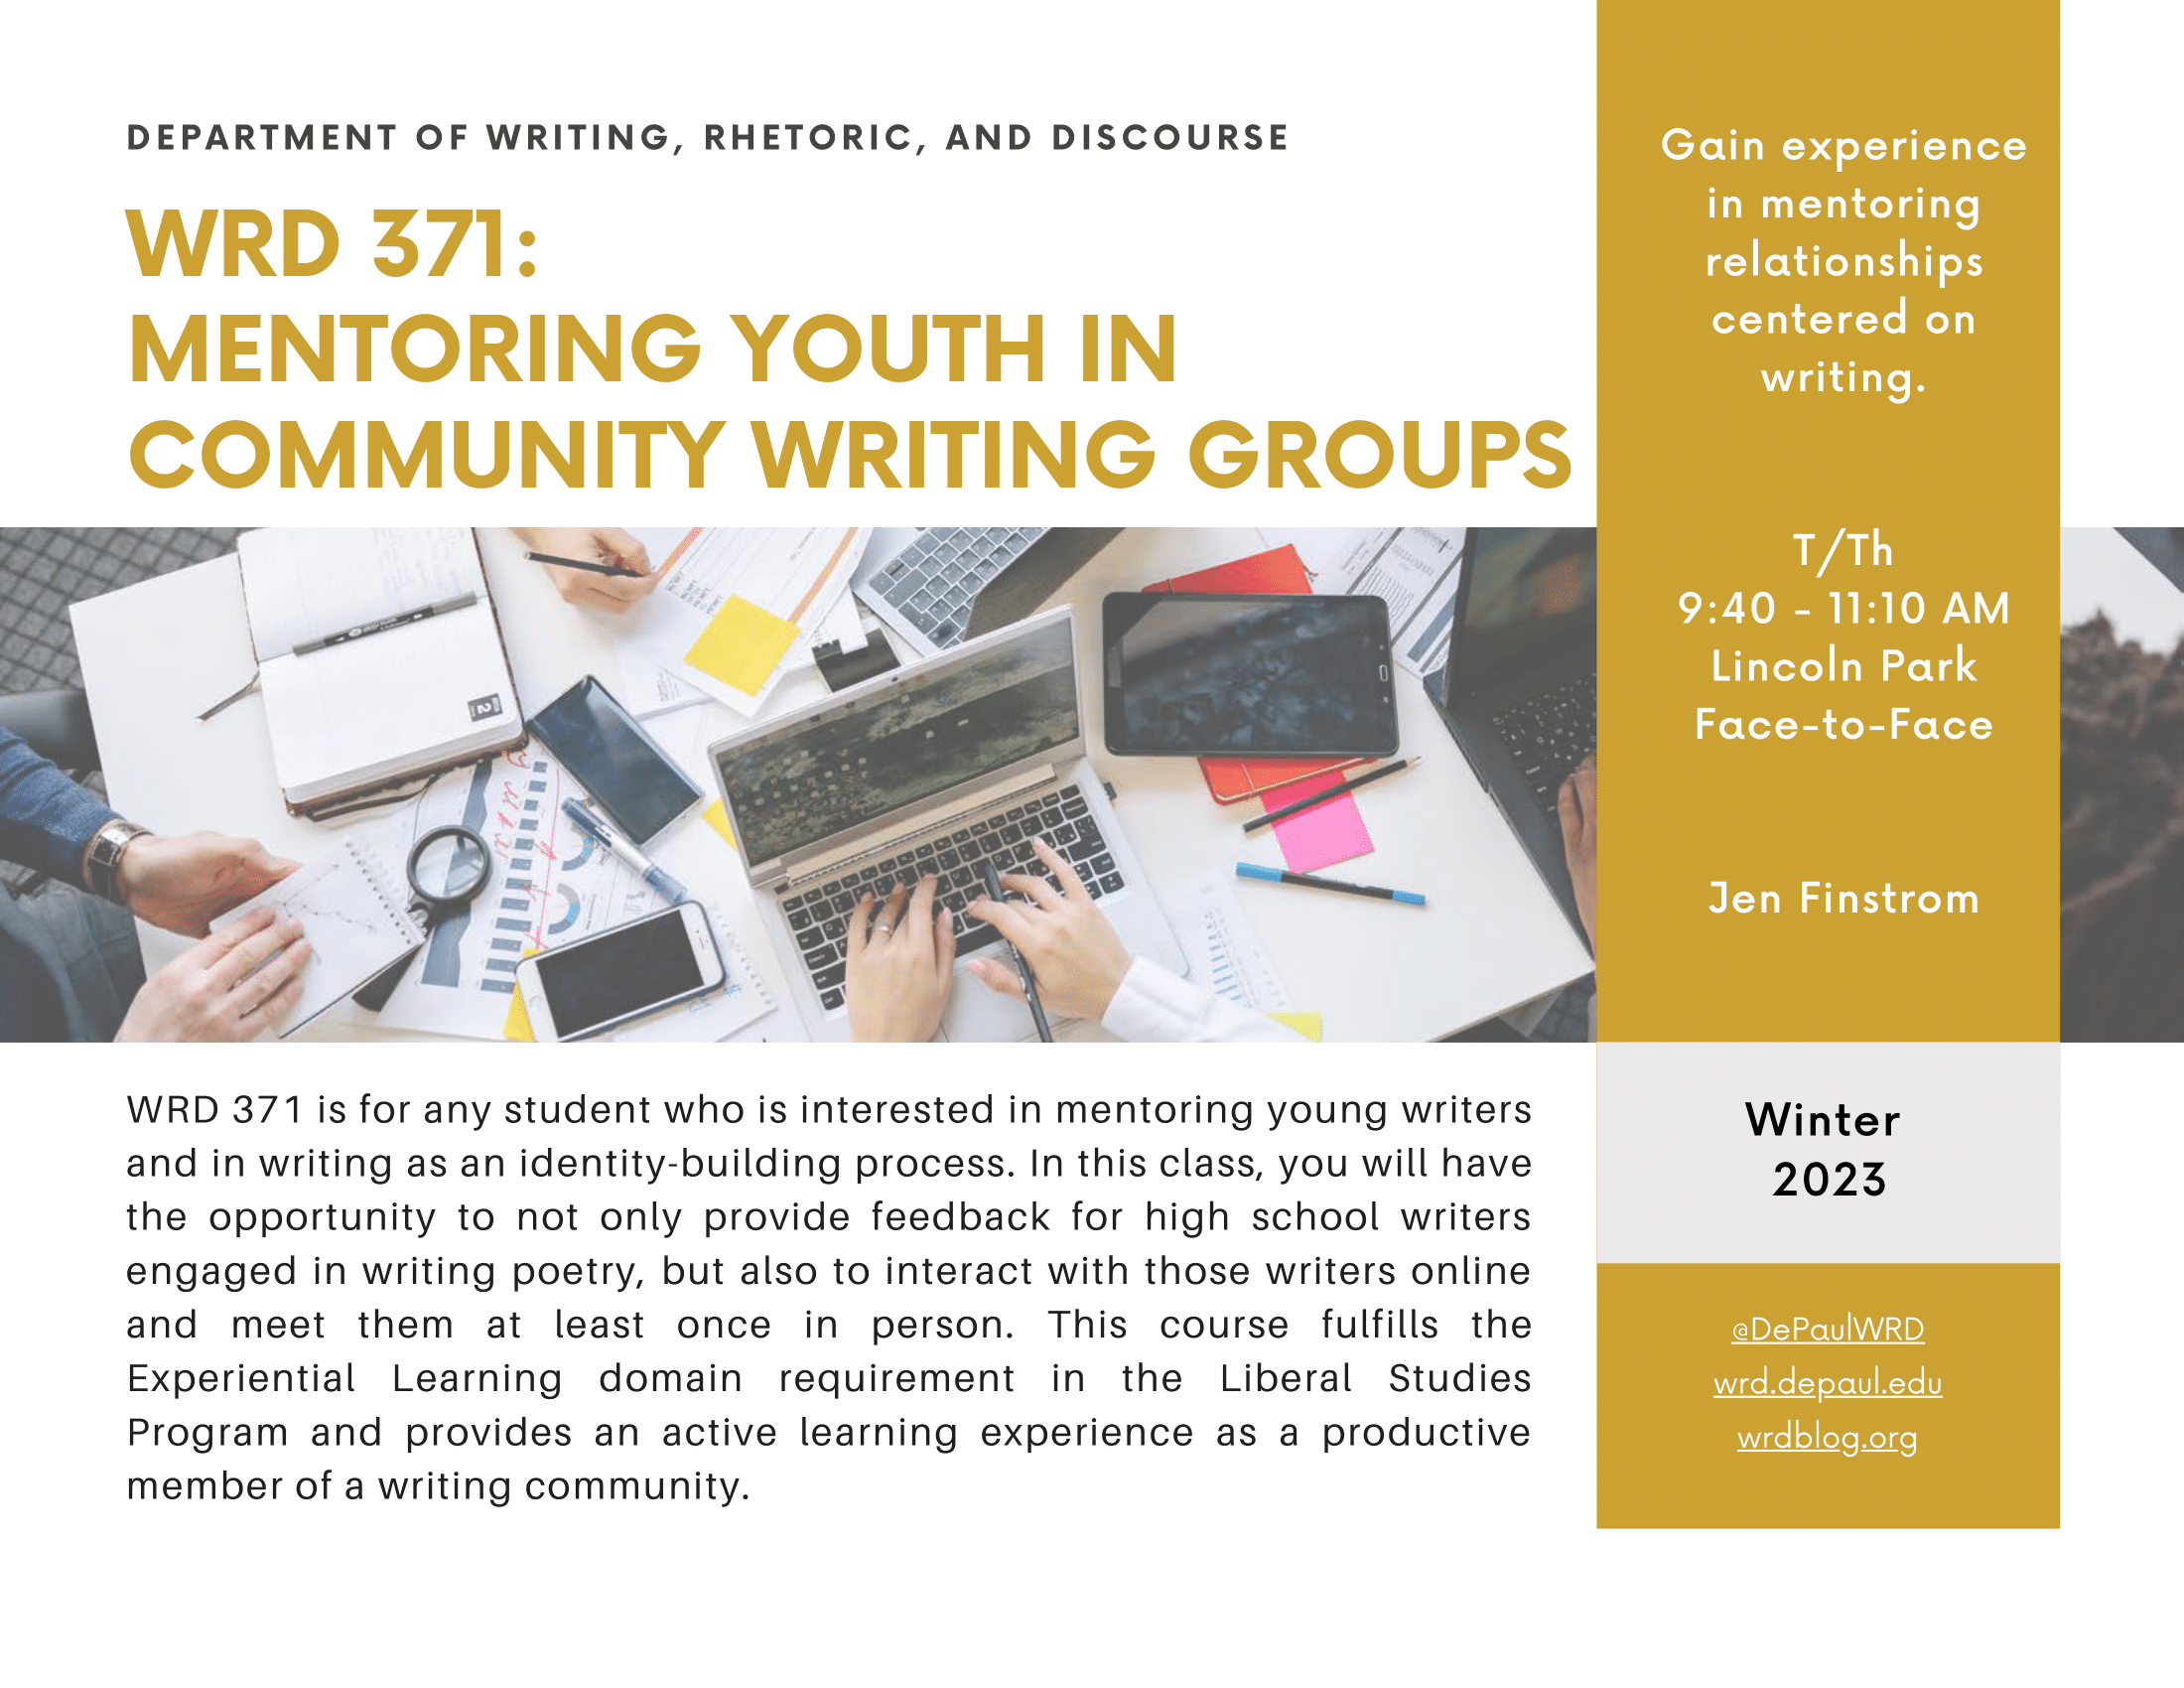 WRD 371: MENTORING YOUTH IN COMMUNITY WRITING GROUPS